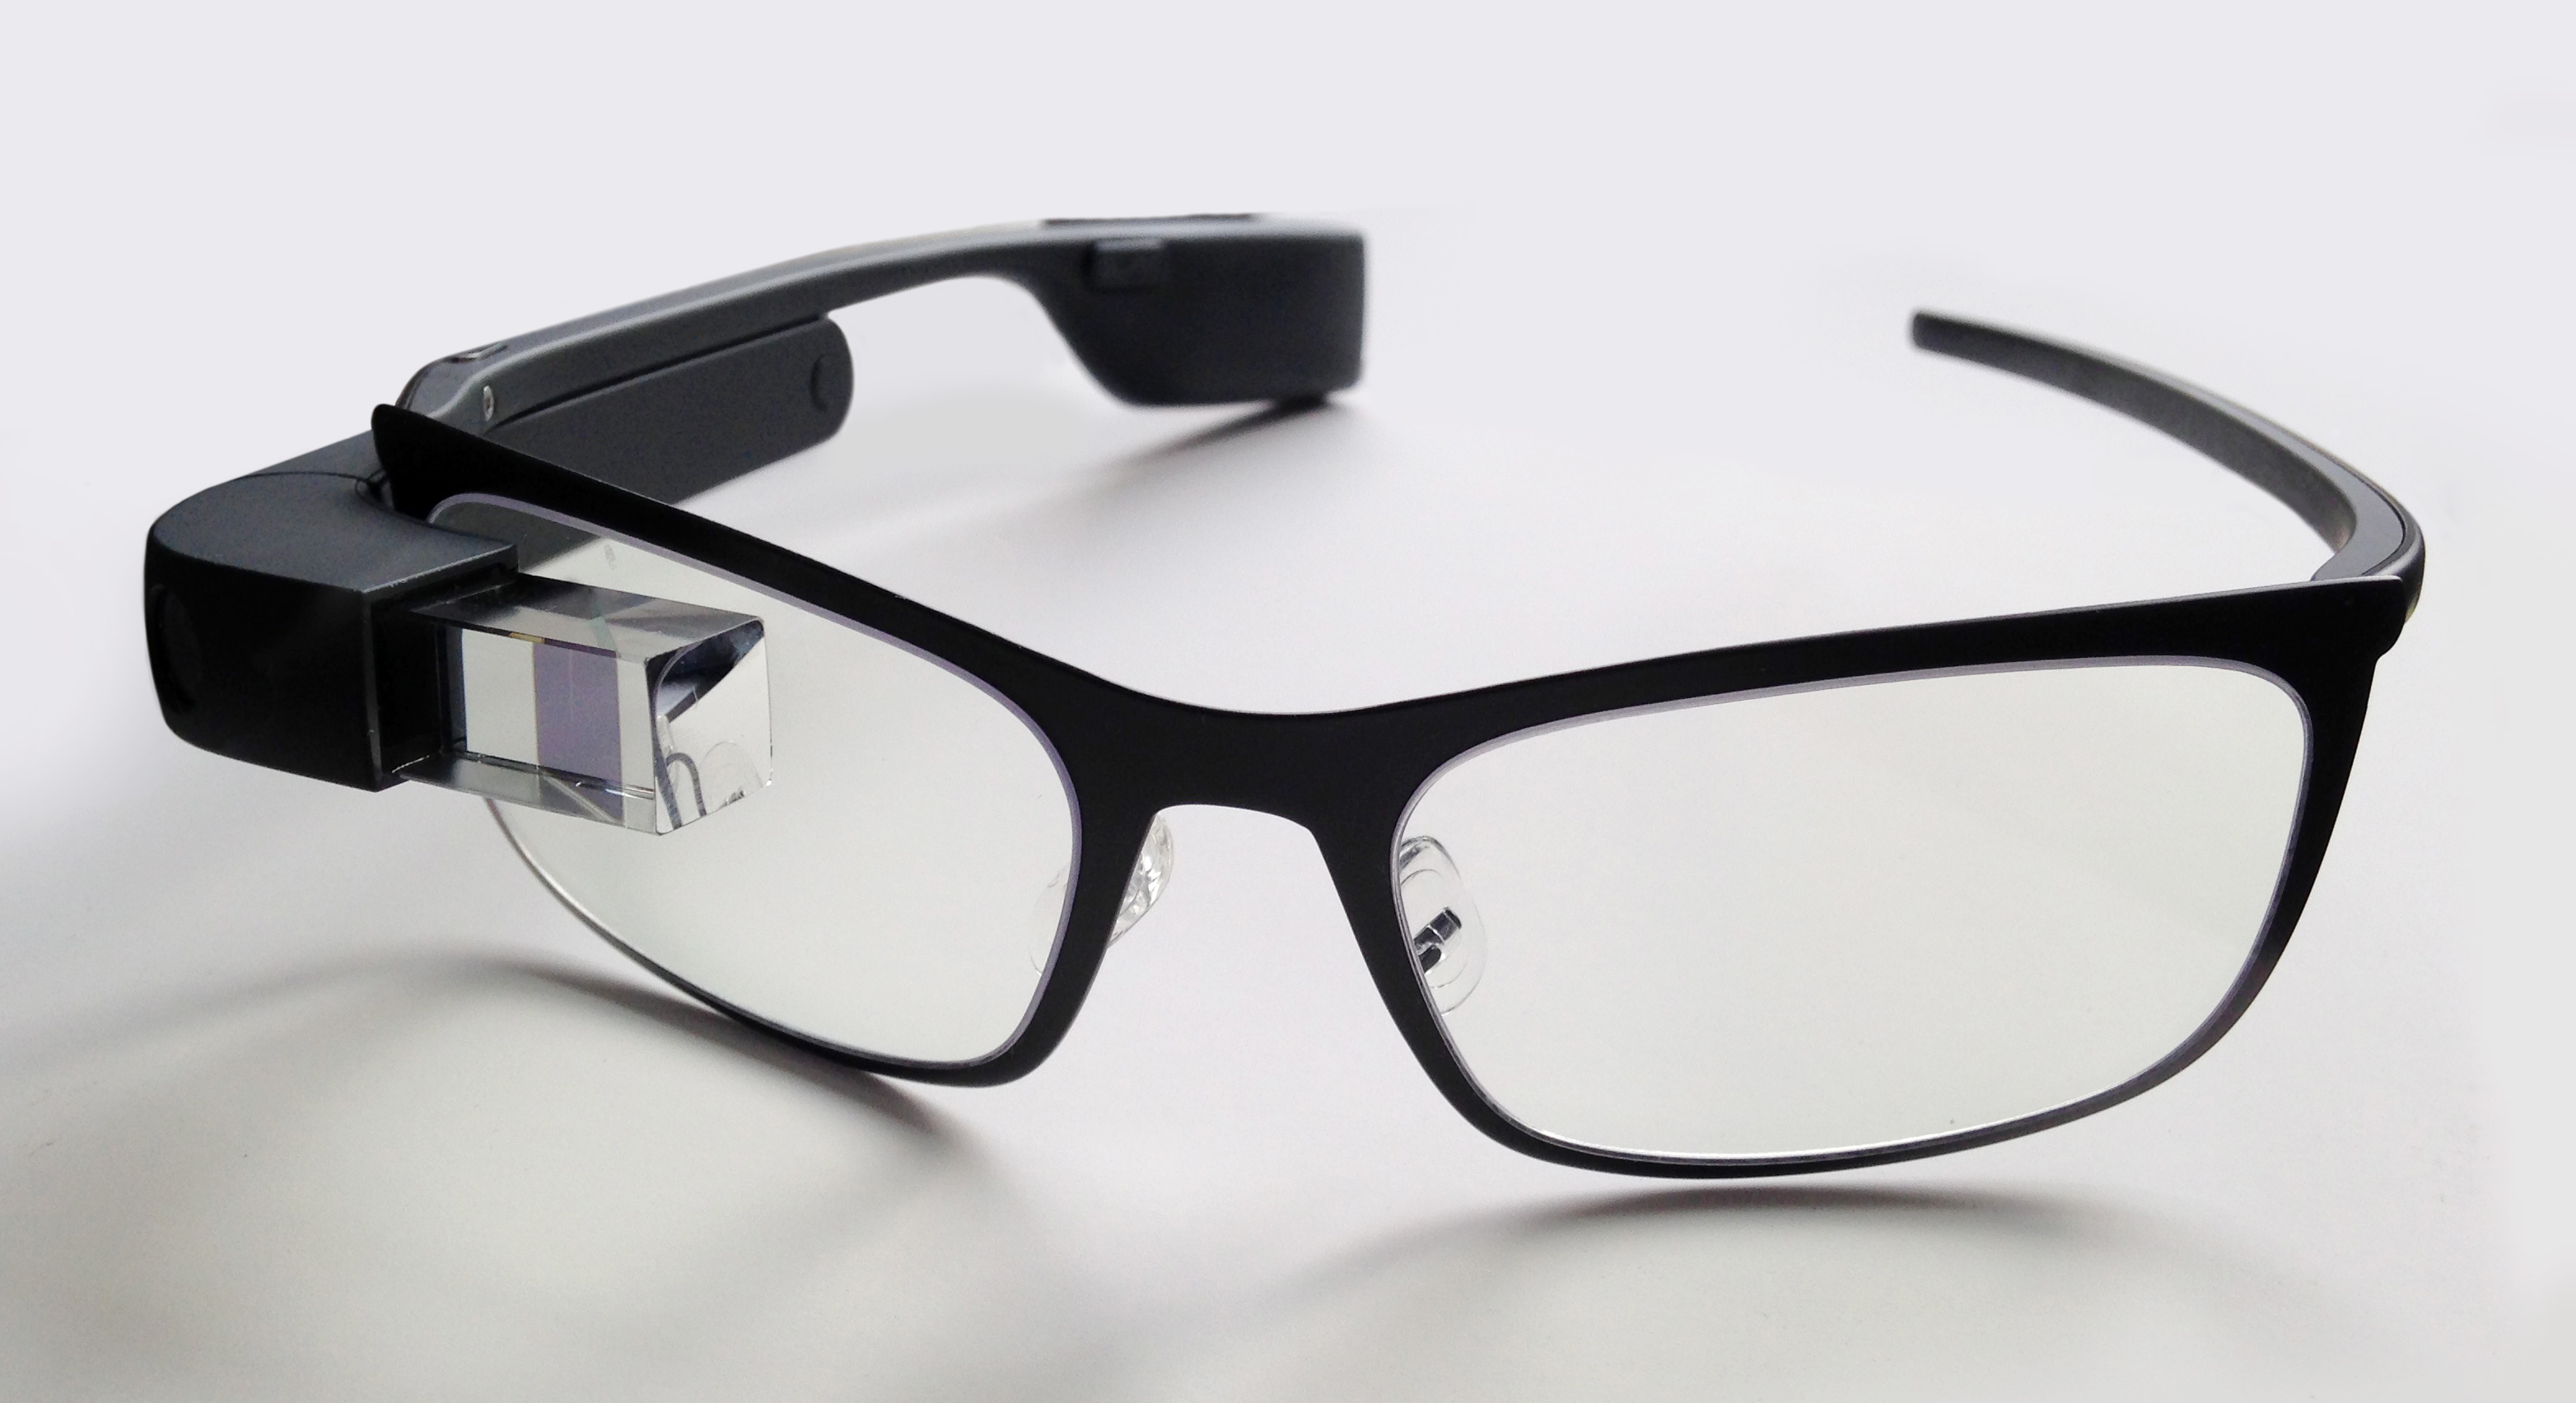 Google glass: reading your mind with the help of a new app